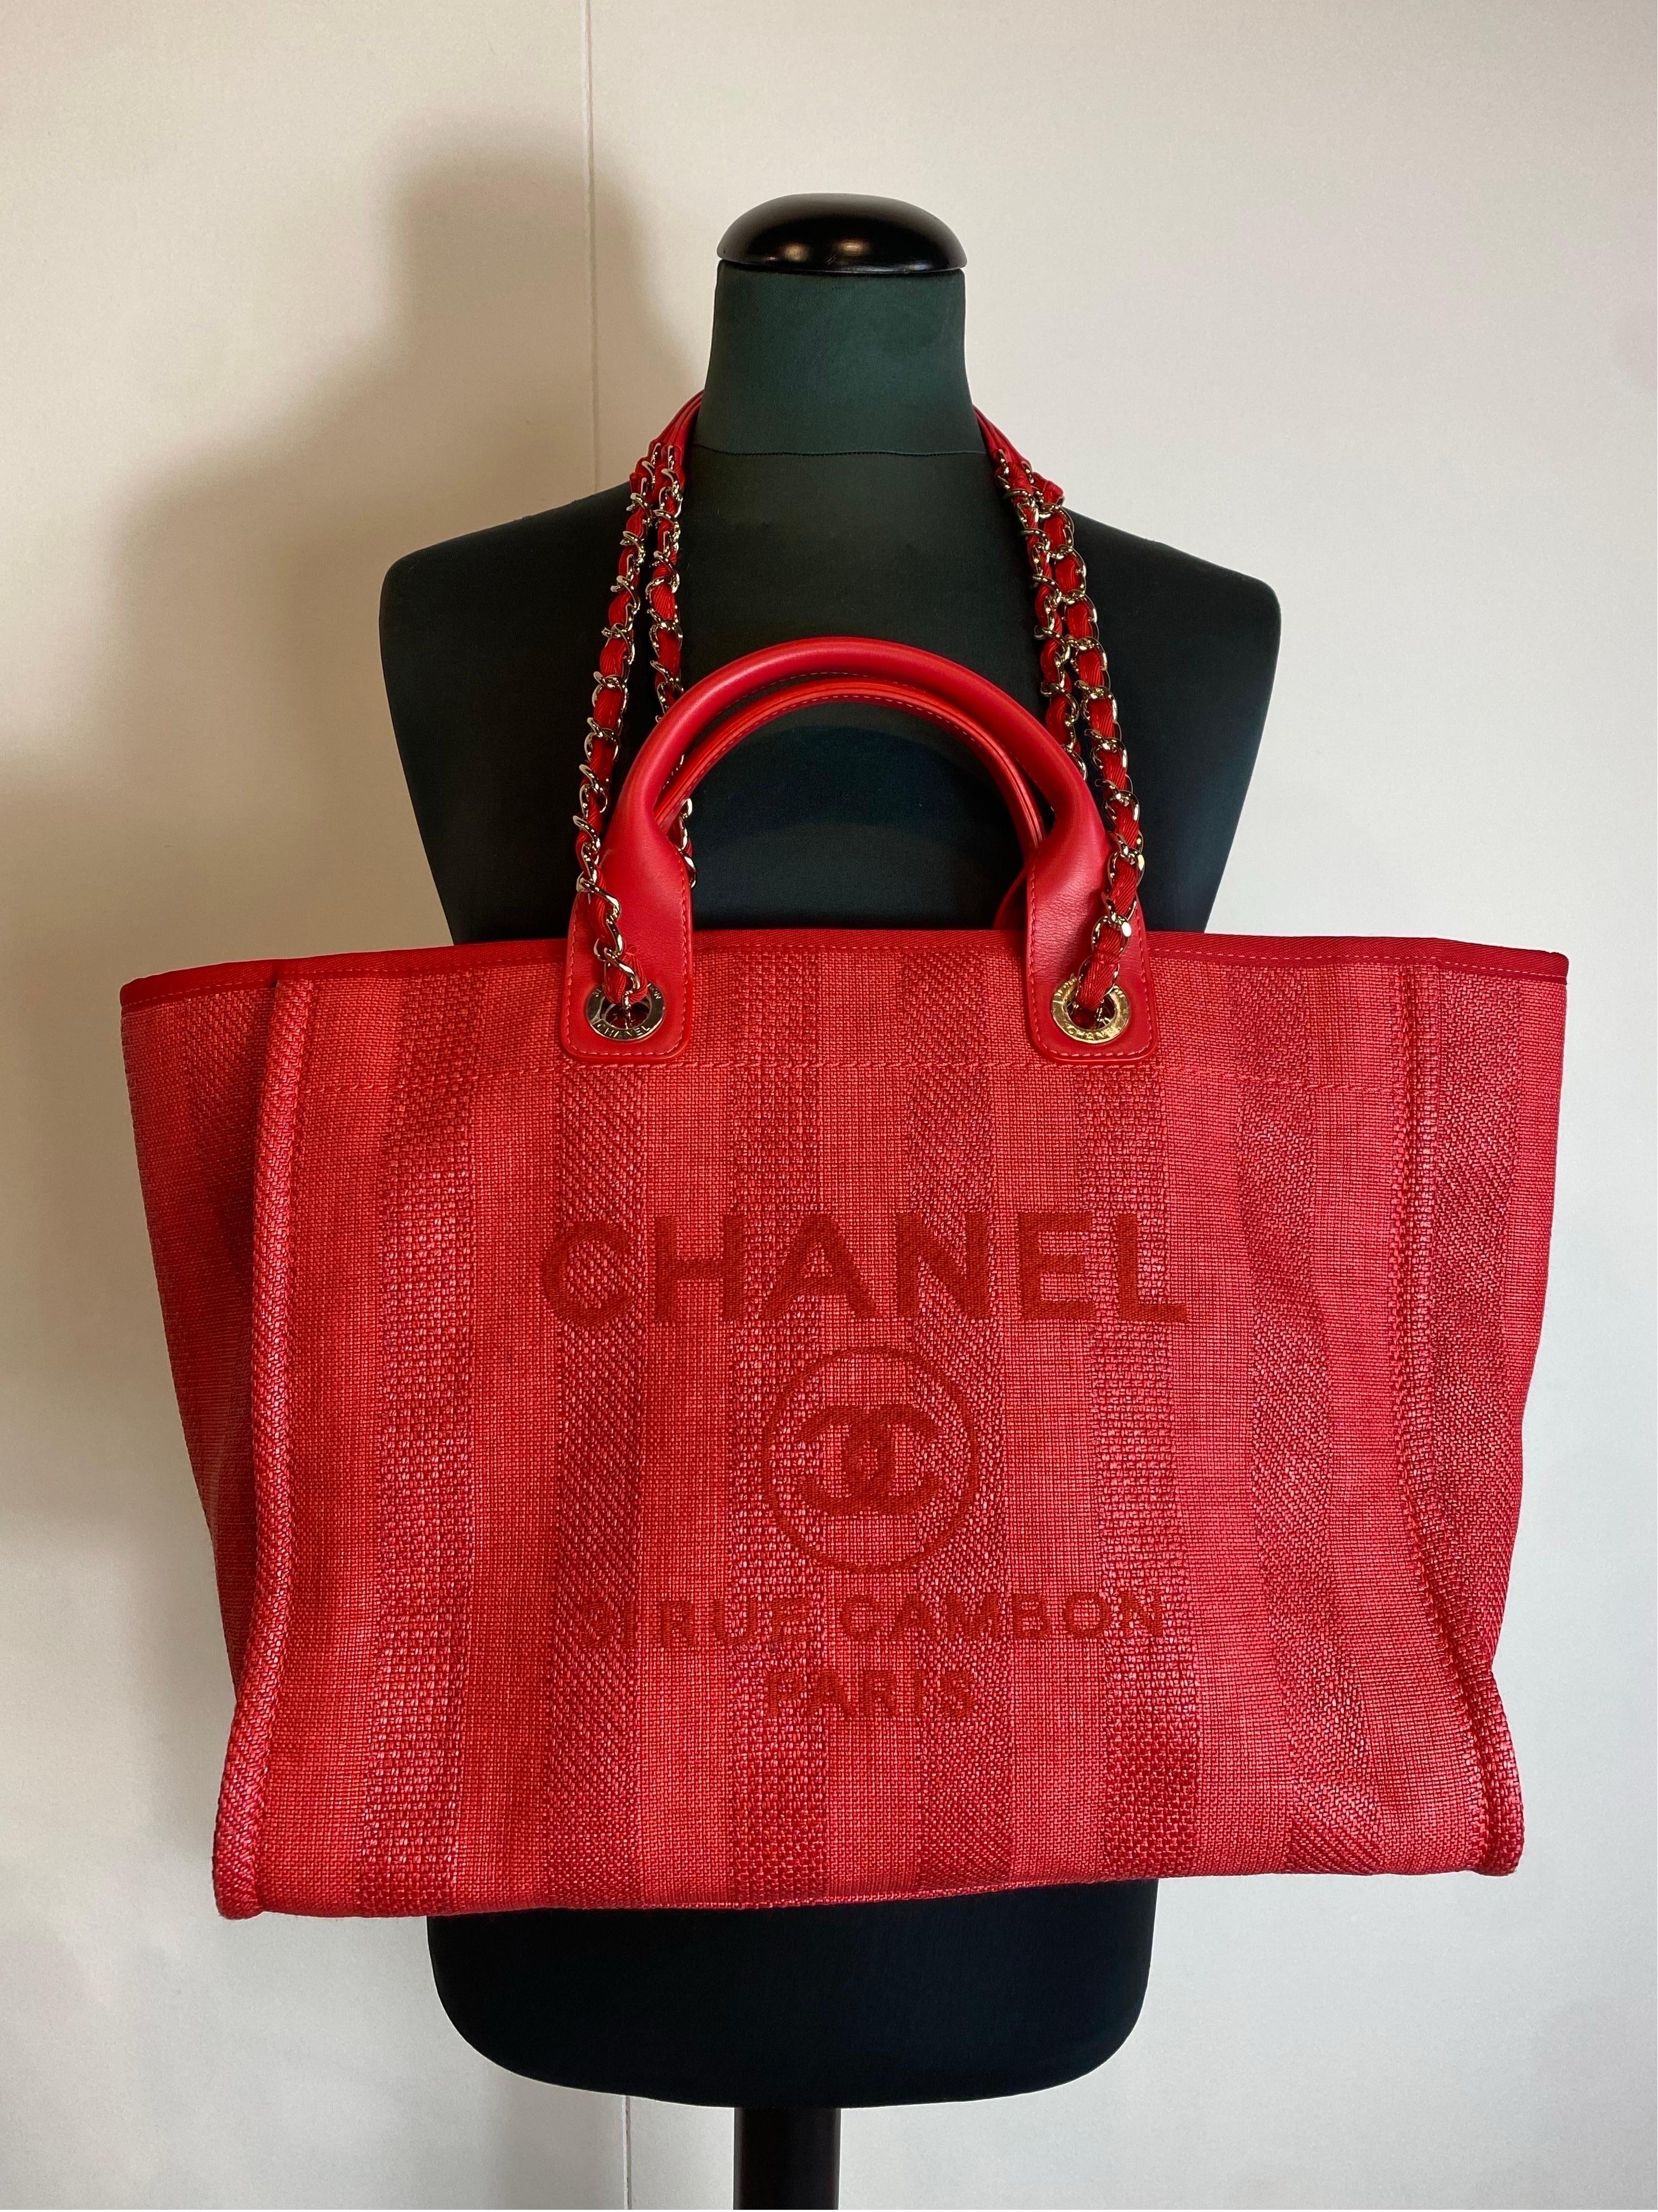 Chanel Deauville tote bag.
In red/coral striped fabric with leather details.
The bag can be carried by hand or on the shoulder.
Magnetic closure.
Inside there are multiple pockets, one is closed with a zip.
30cm high
Wide (base) 37 cm
20cm